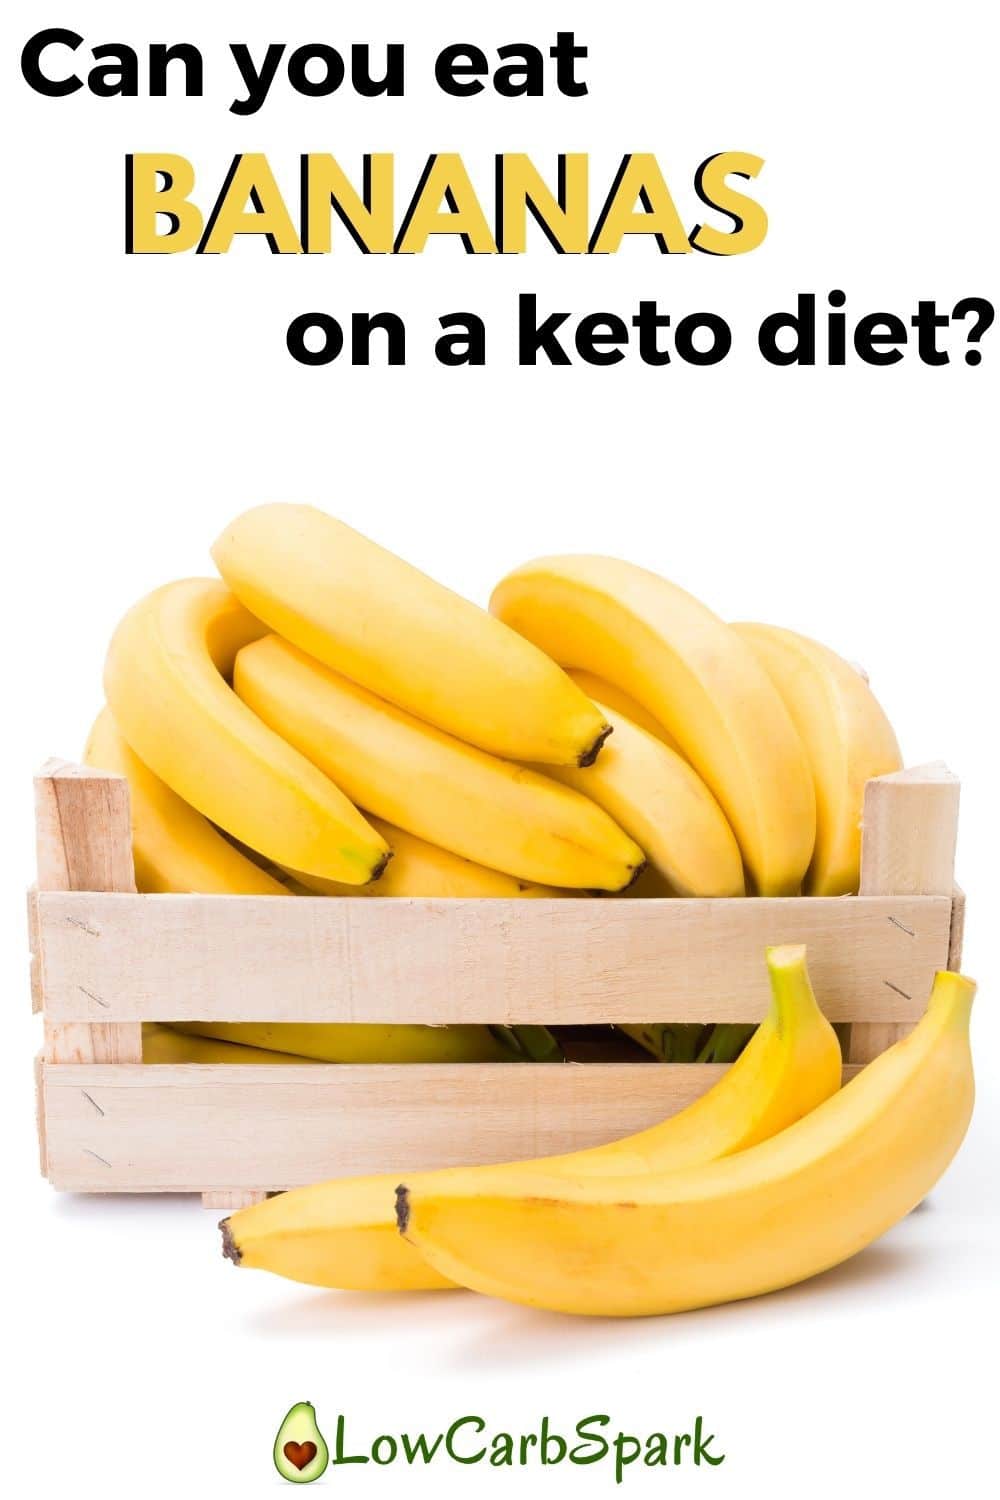 Can You Eat Bananas on a Keto Diet? Carbs in Banana